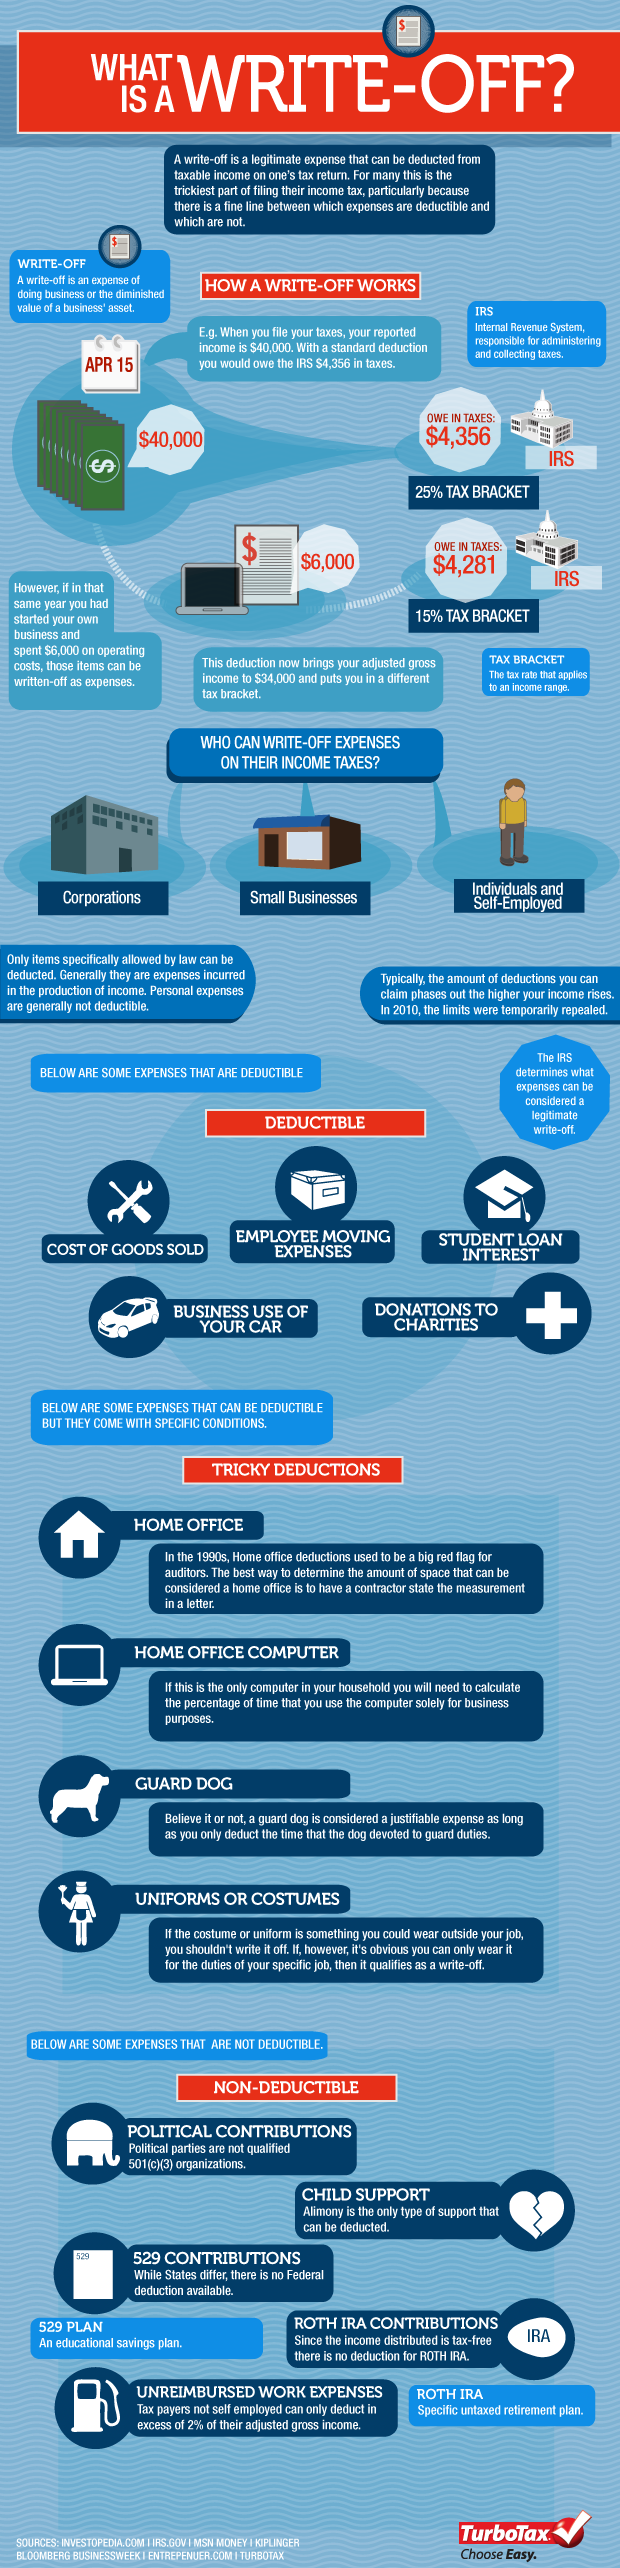 what-is-a-tax-write-off-tax-deductions-explained-the-turbotax-blog